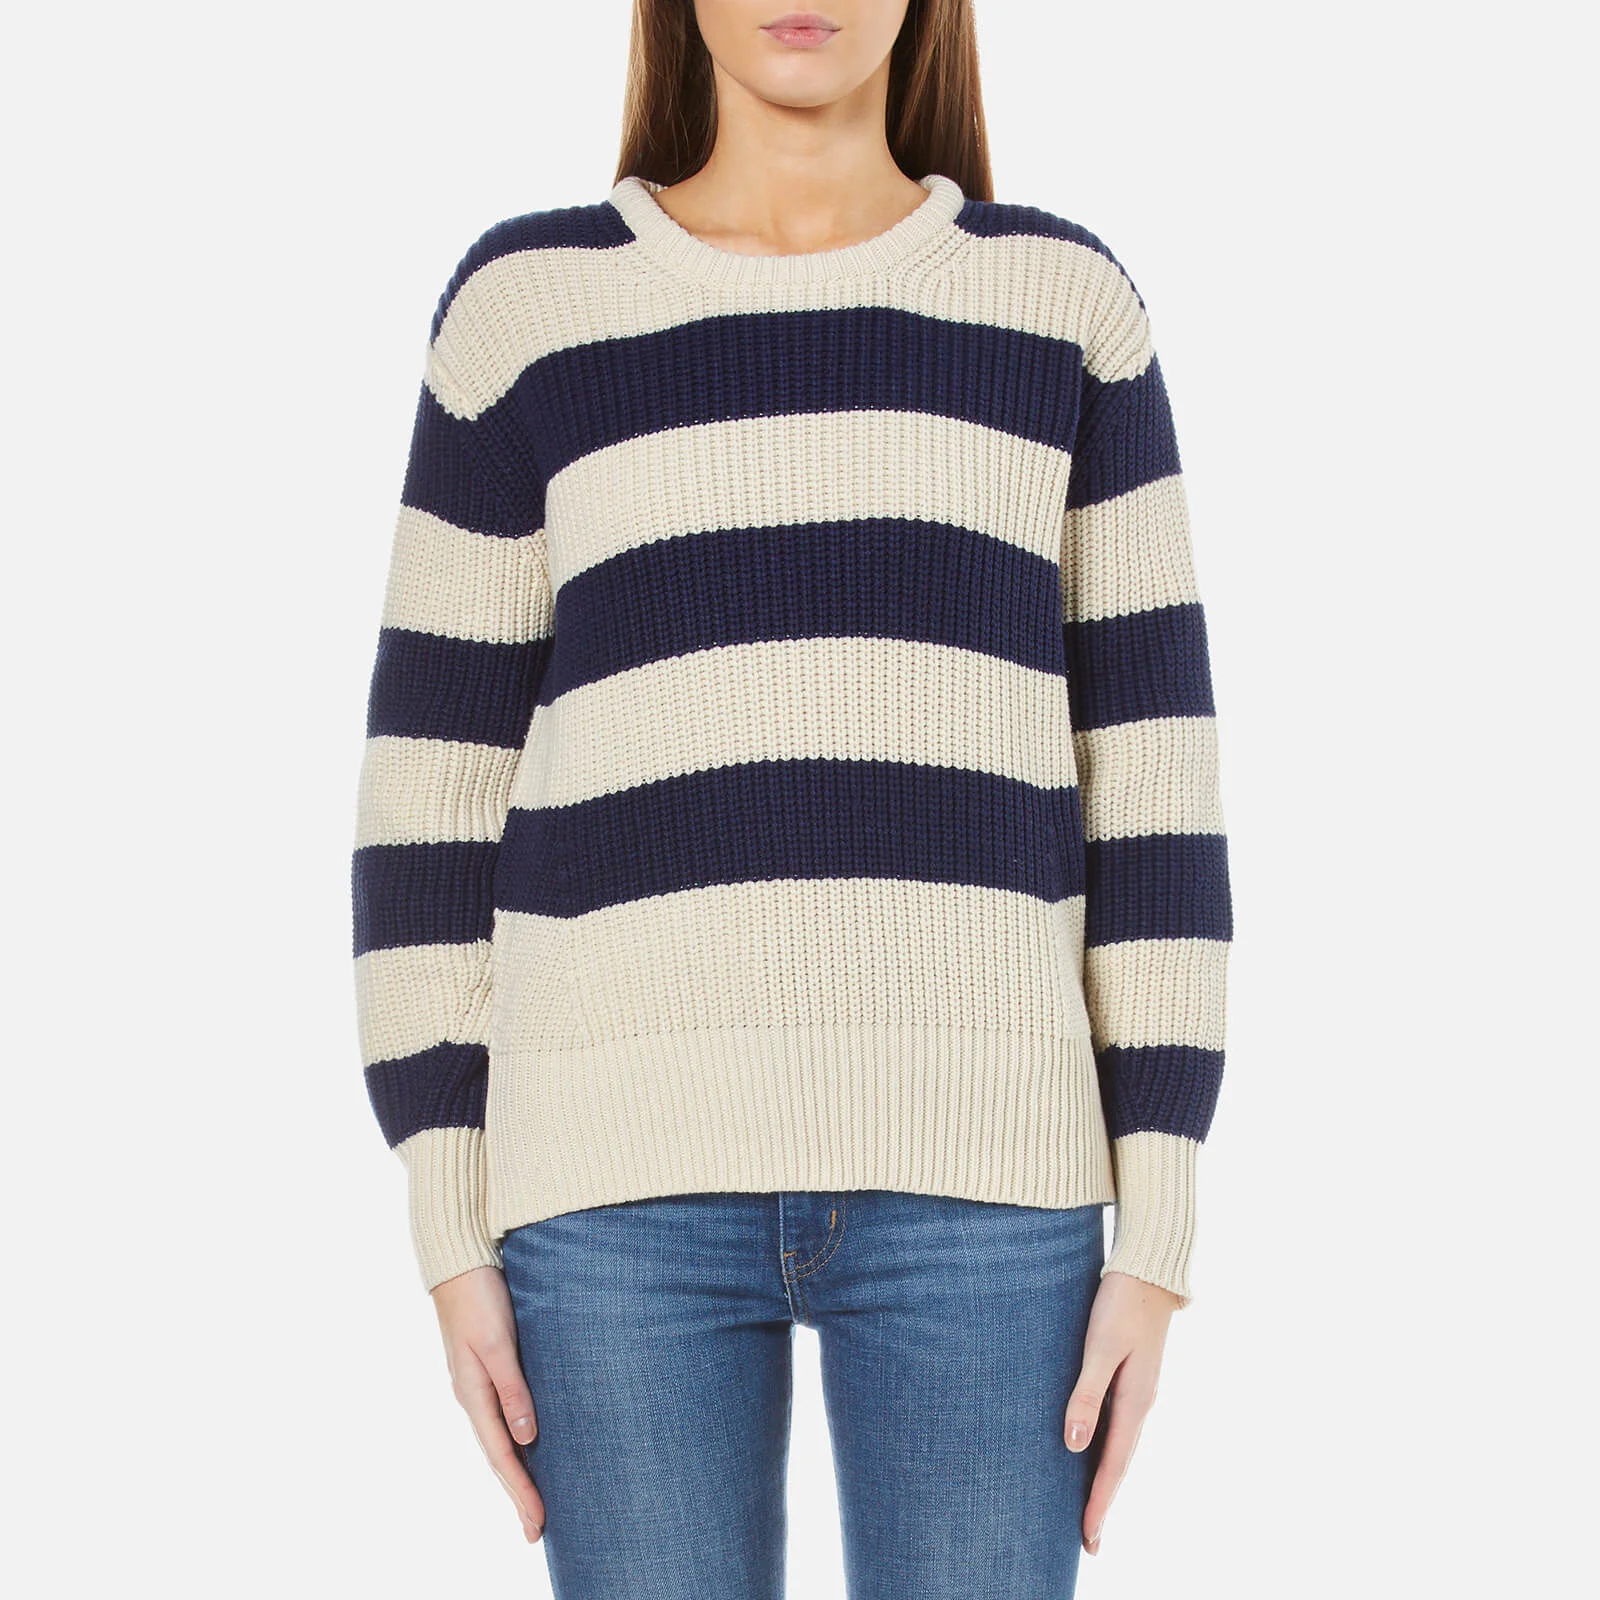 Maison Scotch Women's Cotton Mix Pullover with Shaped Sleeves - Multi Image 1